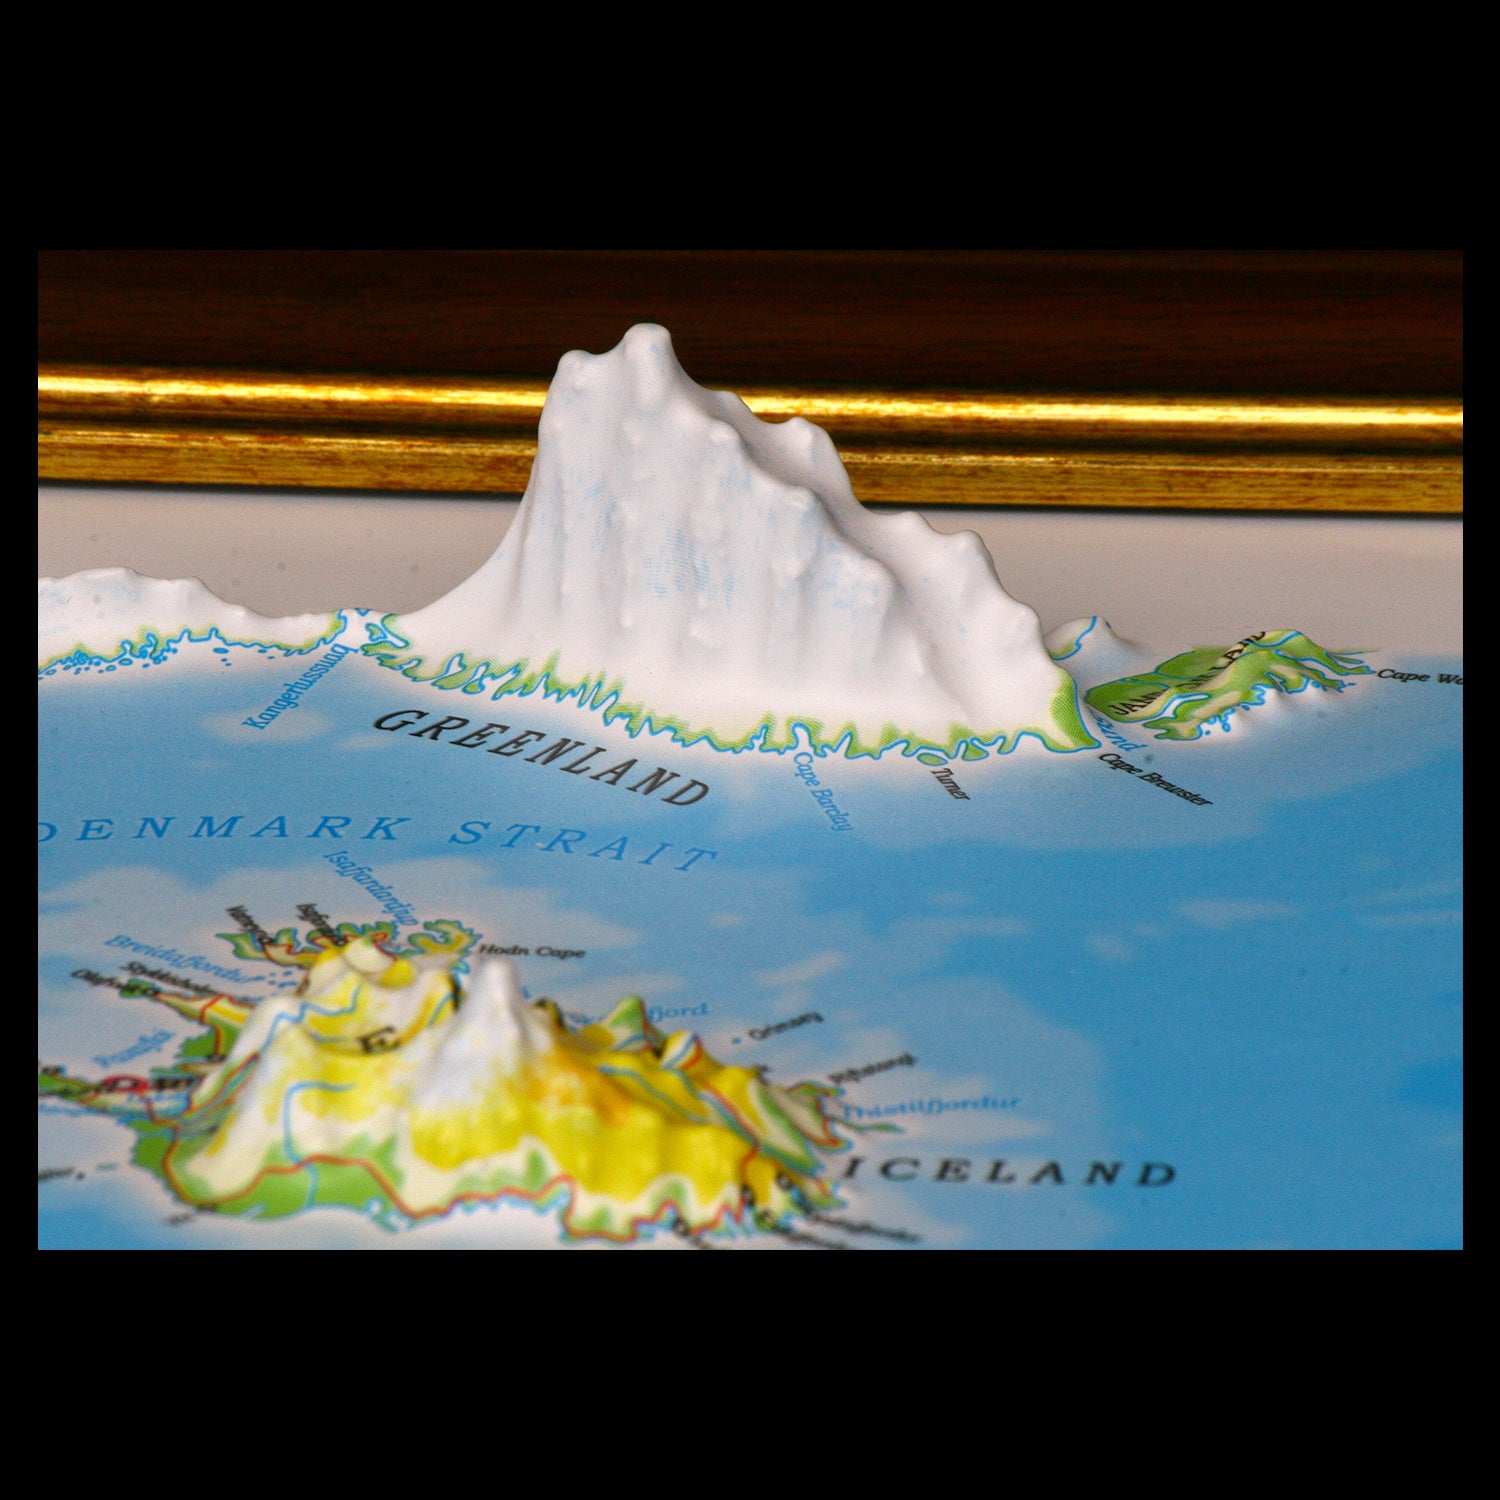 Europe Three Dimensional 3D Raised Relief Map by Testplay